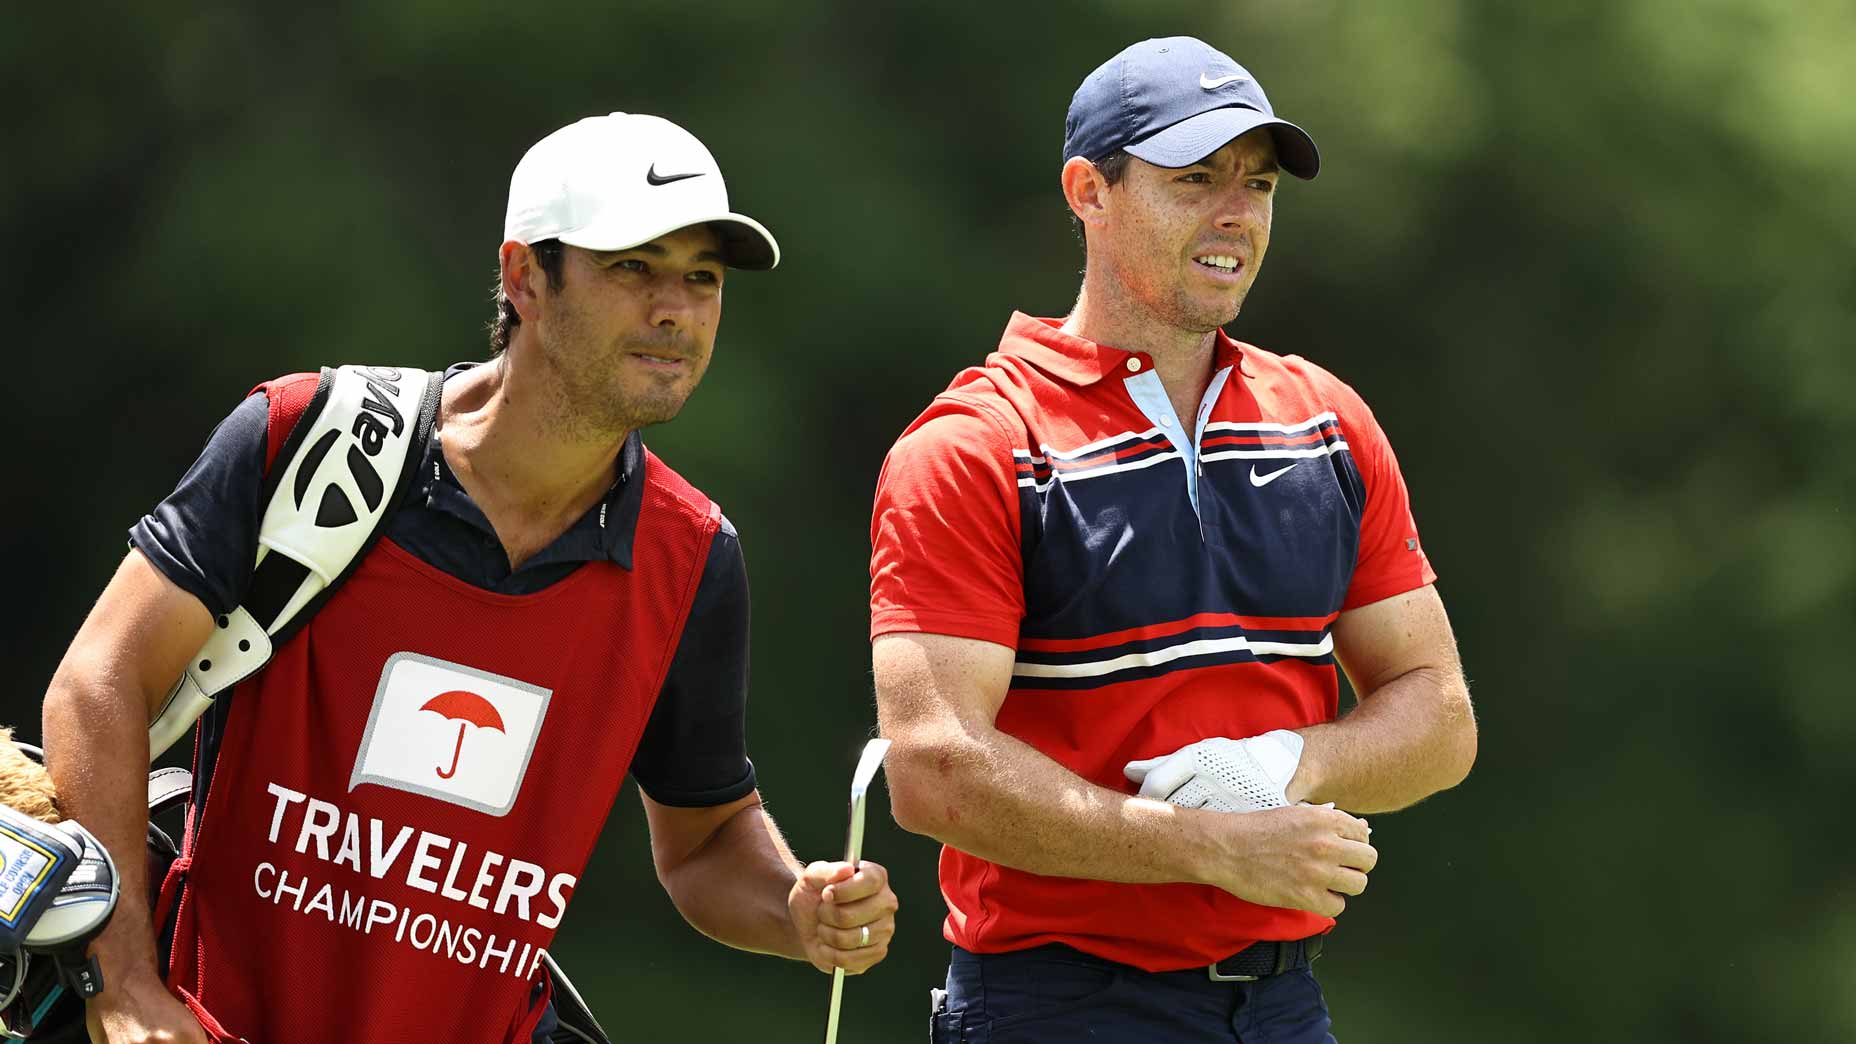 Rory McIlroy with caddy at 2021 Travelers Championship